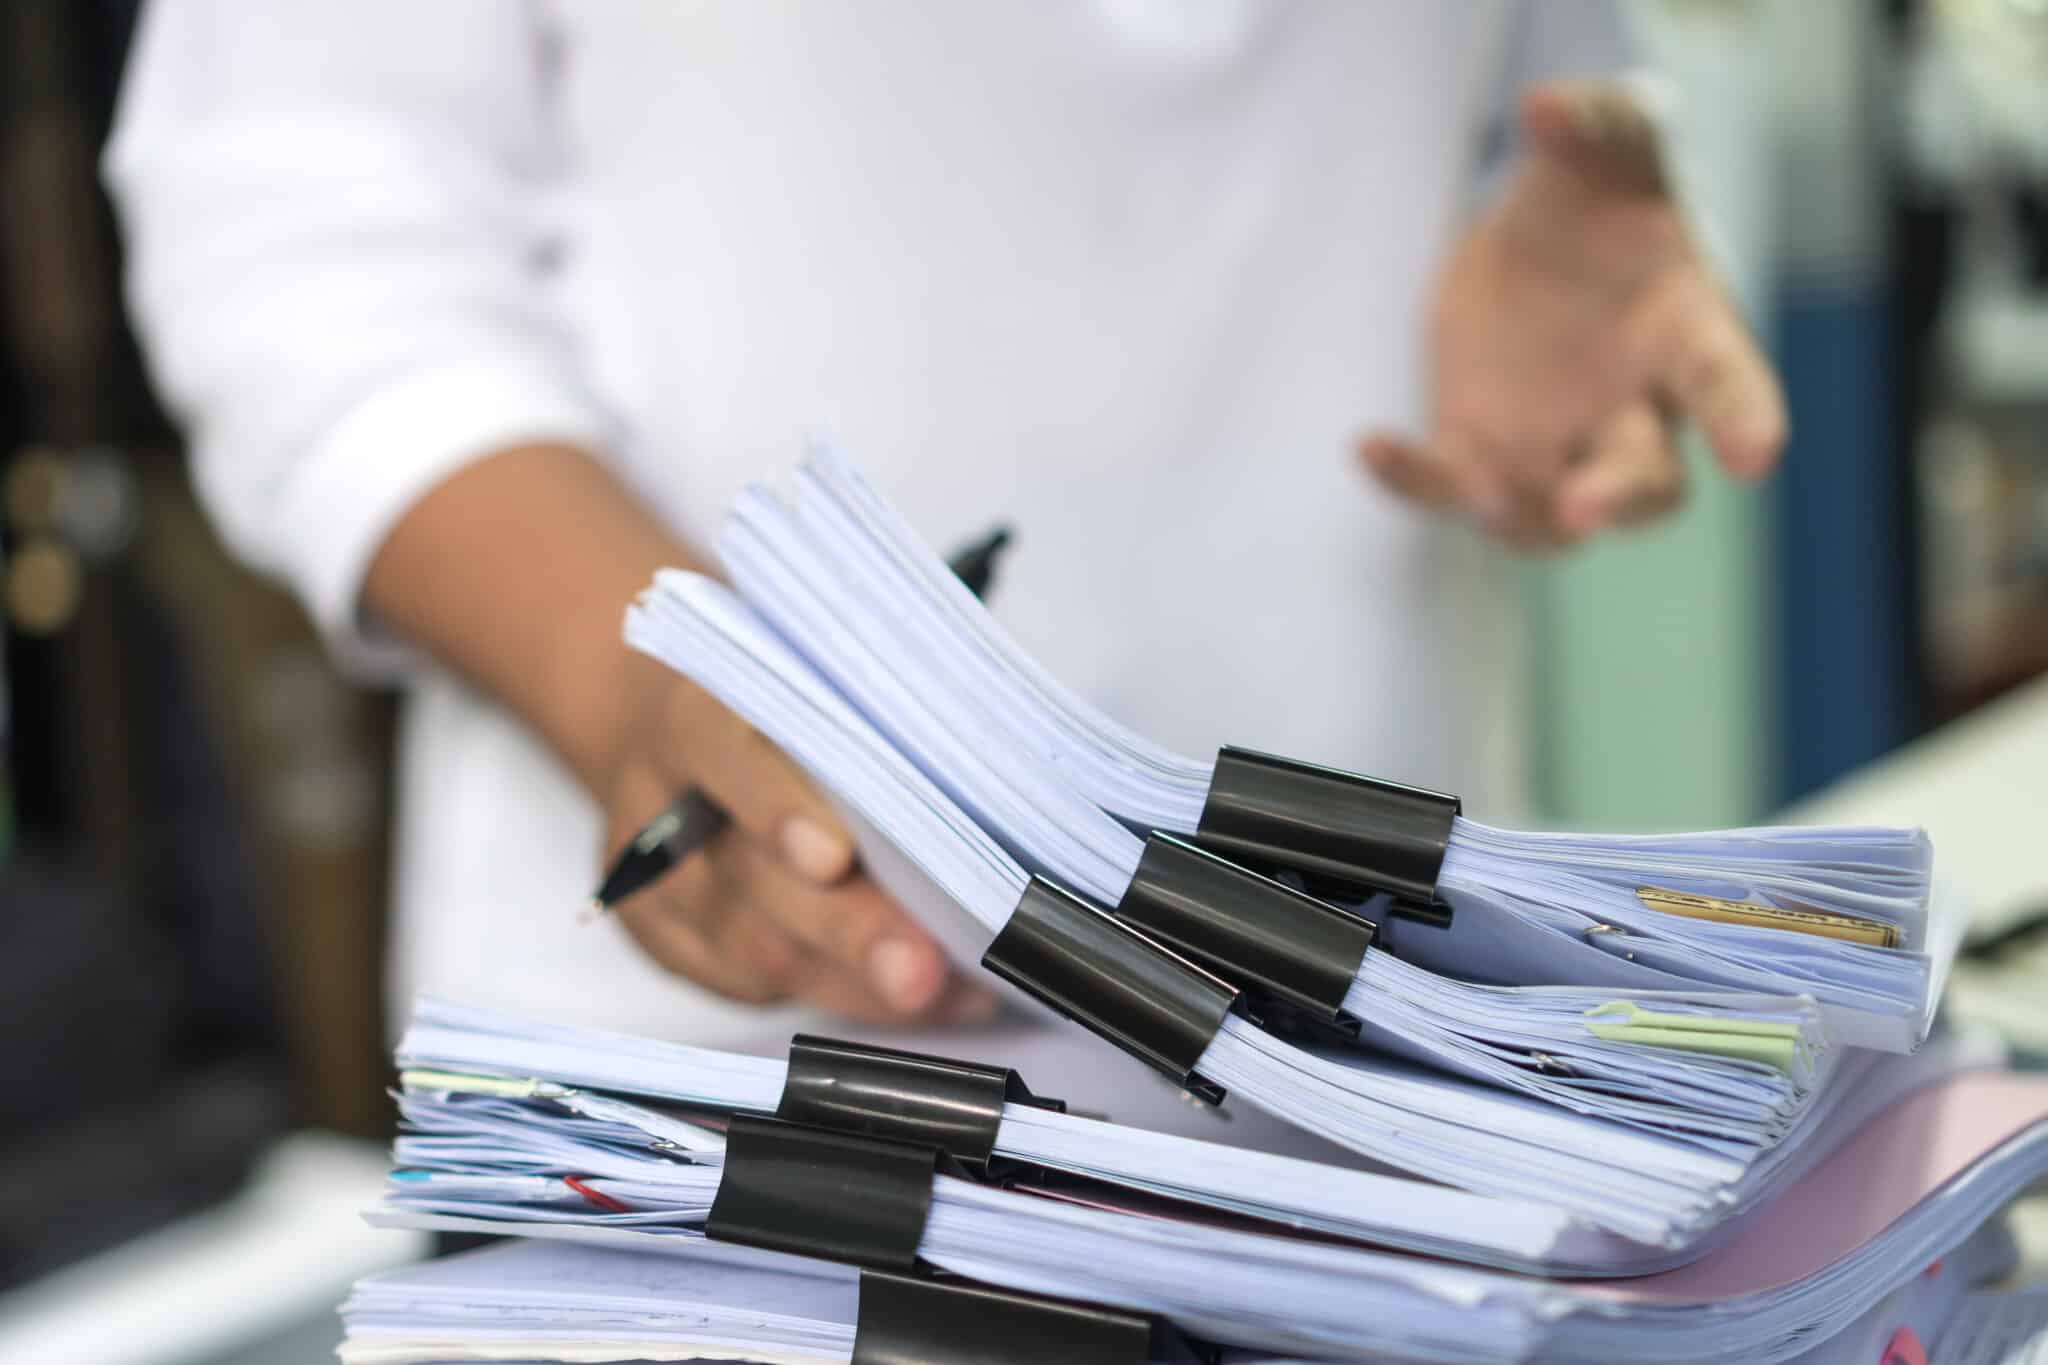 Worker sorts stacks of insurance documents, denoting transcription's importance in file organization